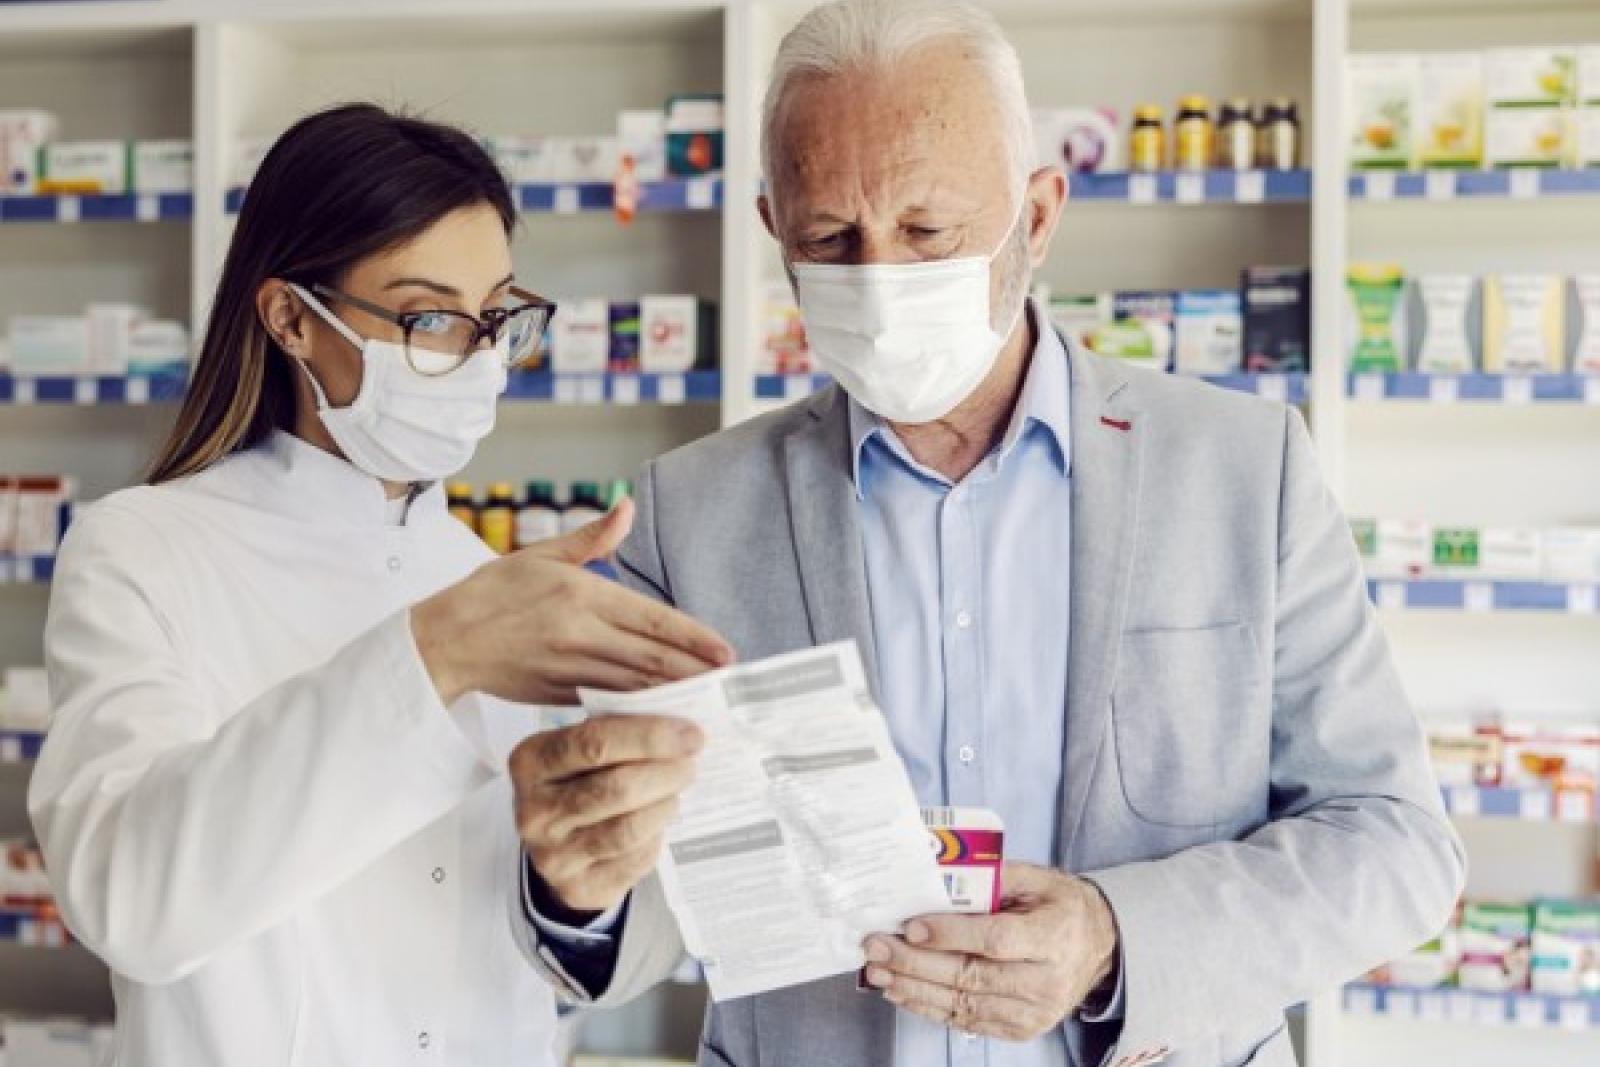 Pharmacist helping patient understand medication